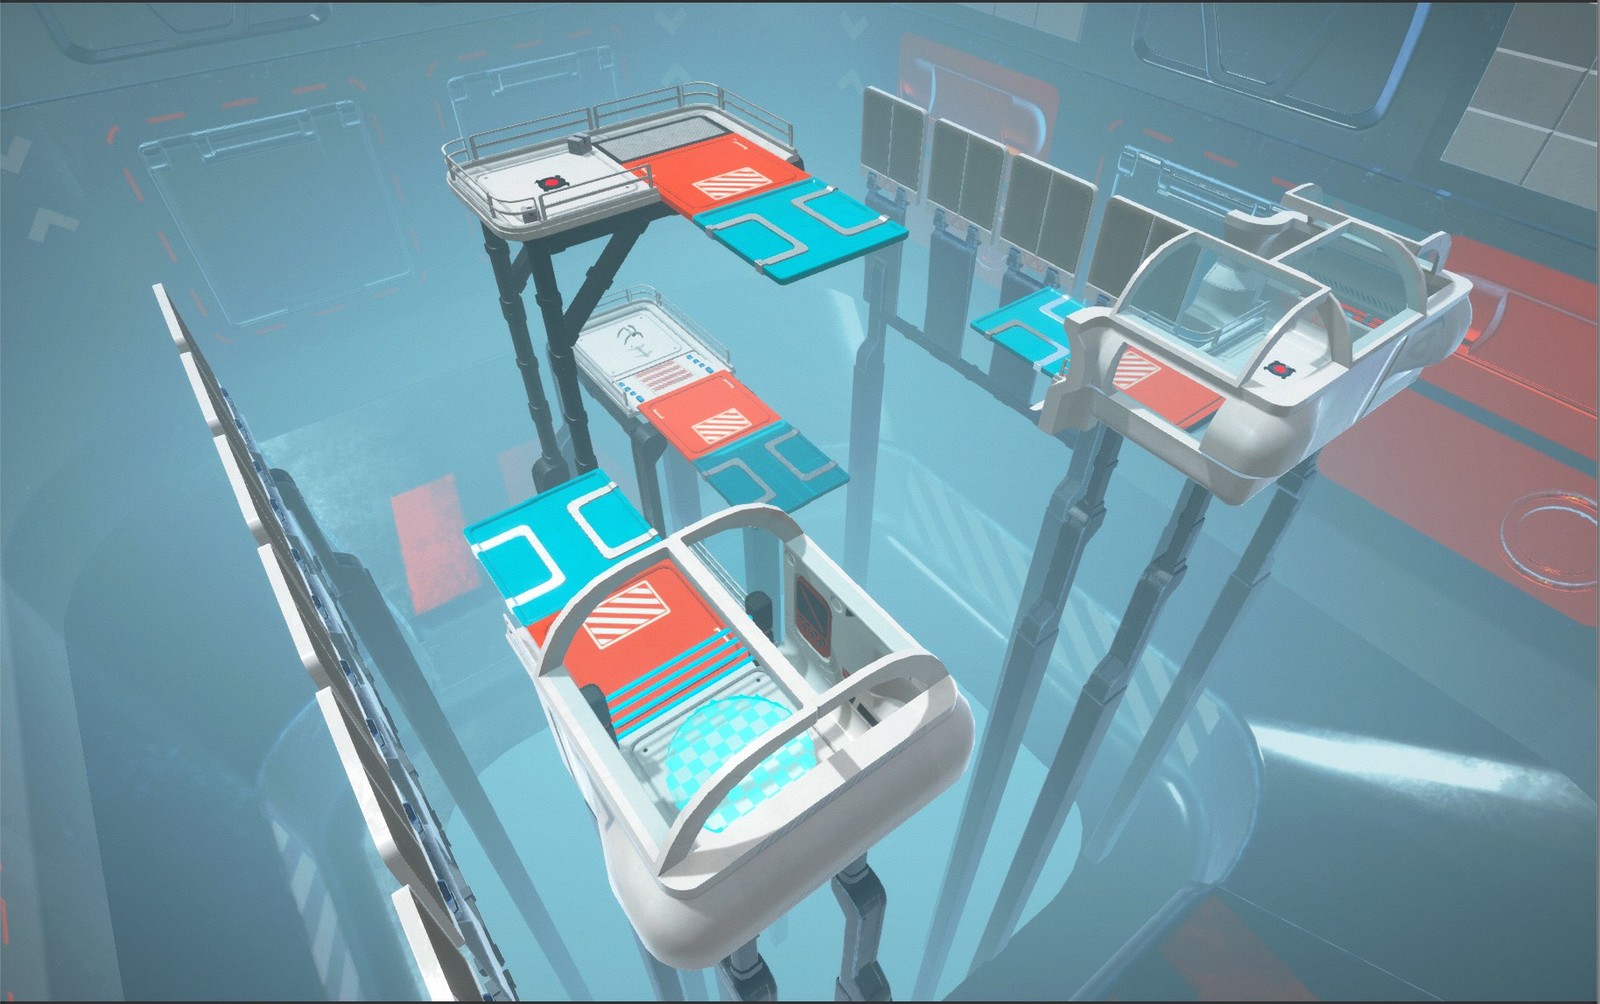 Example of a level I made, the blue platforms rotate around, creating a Ferris wheel